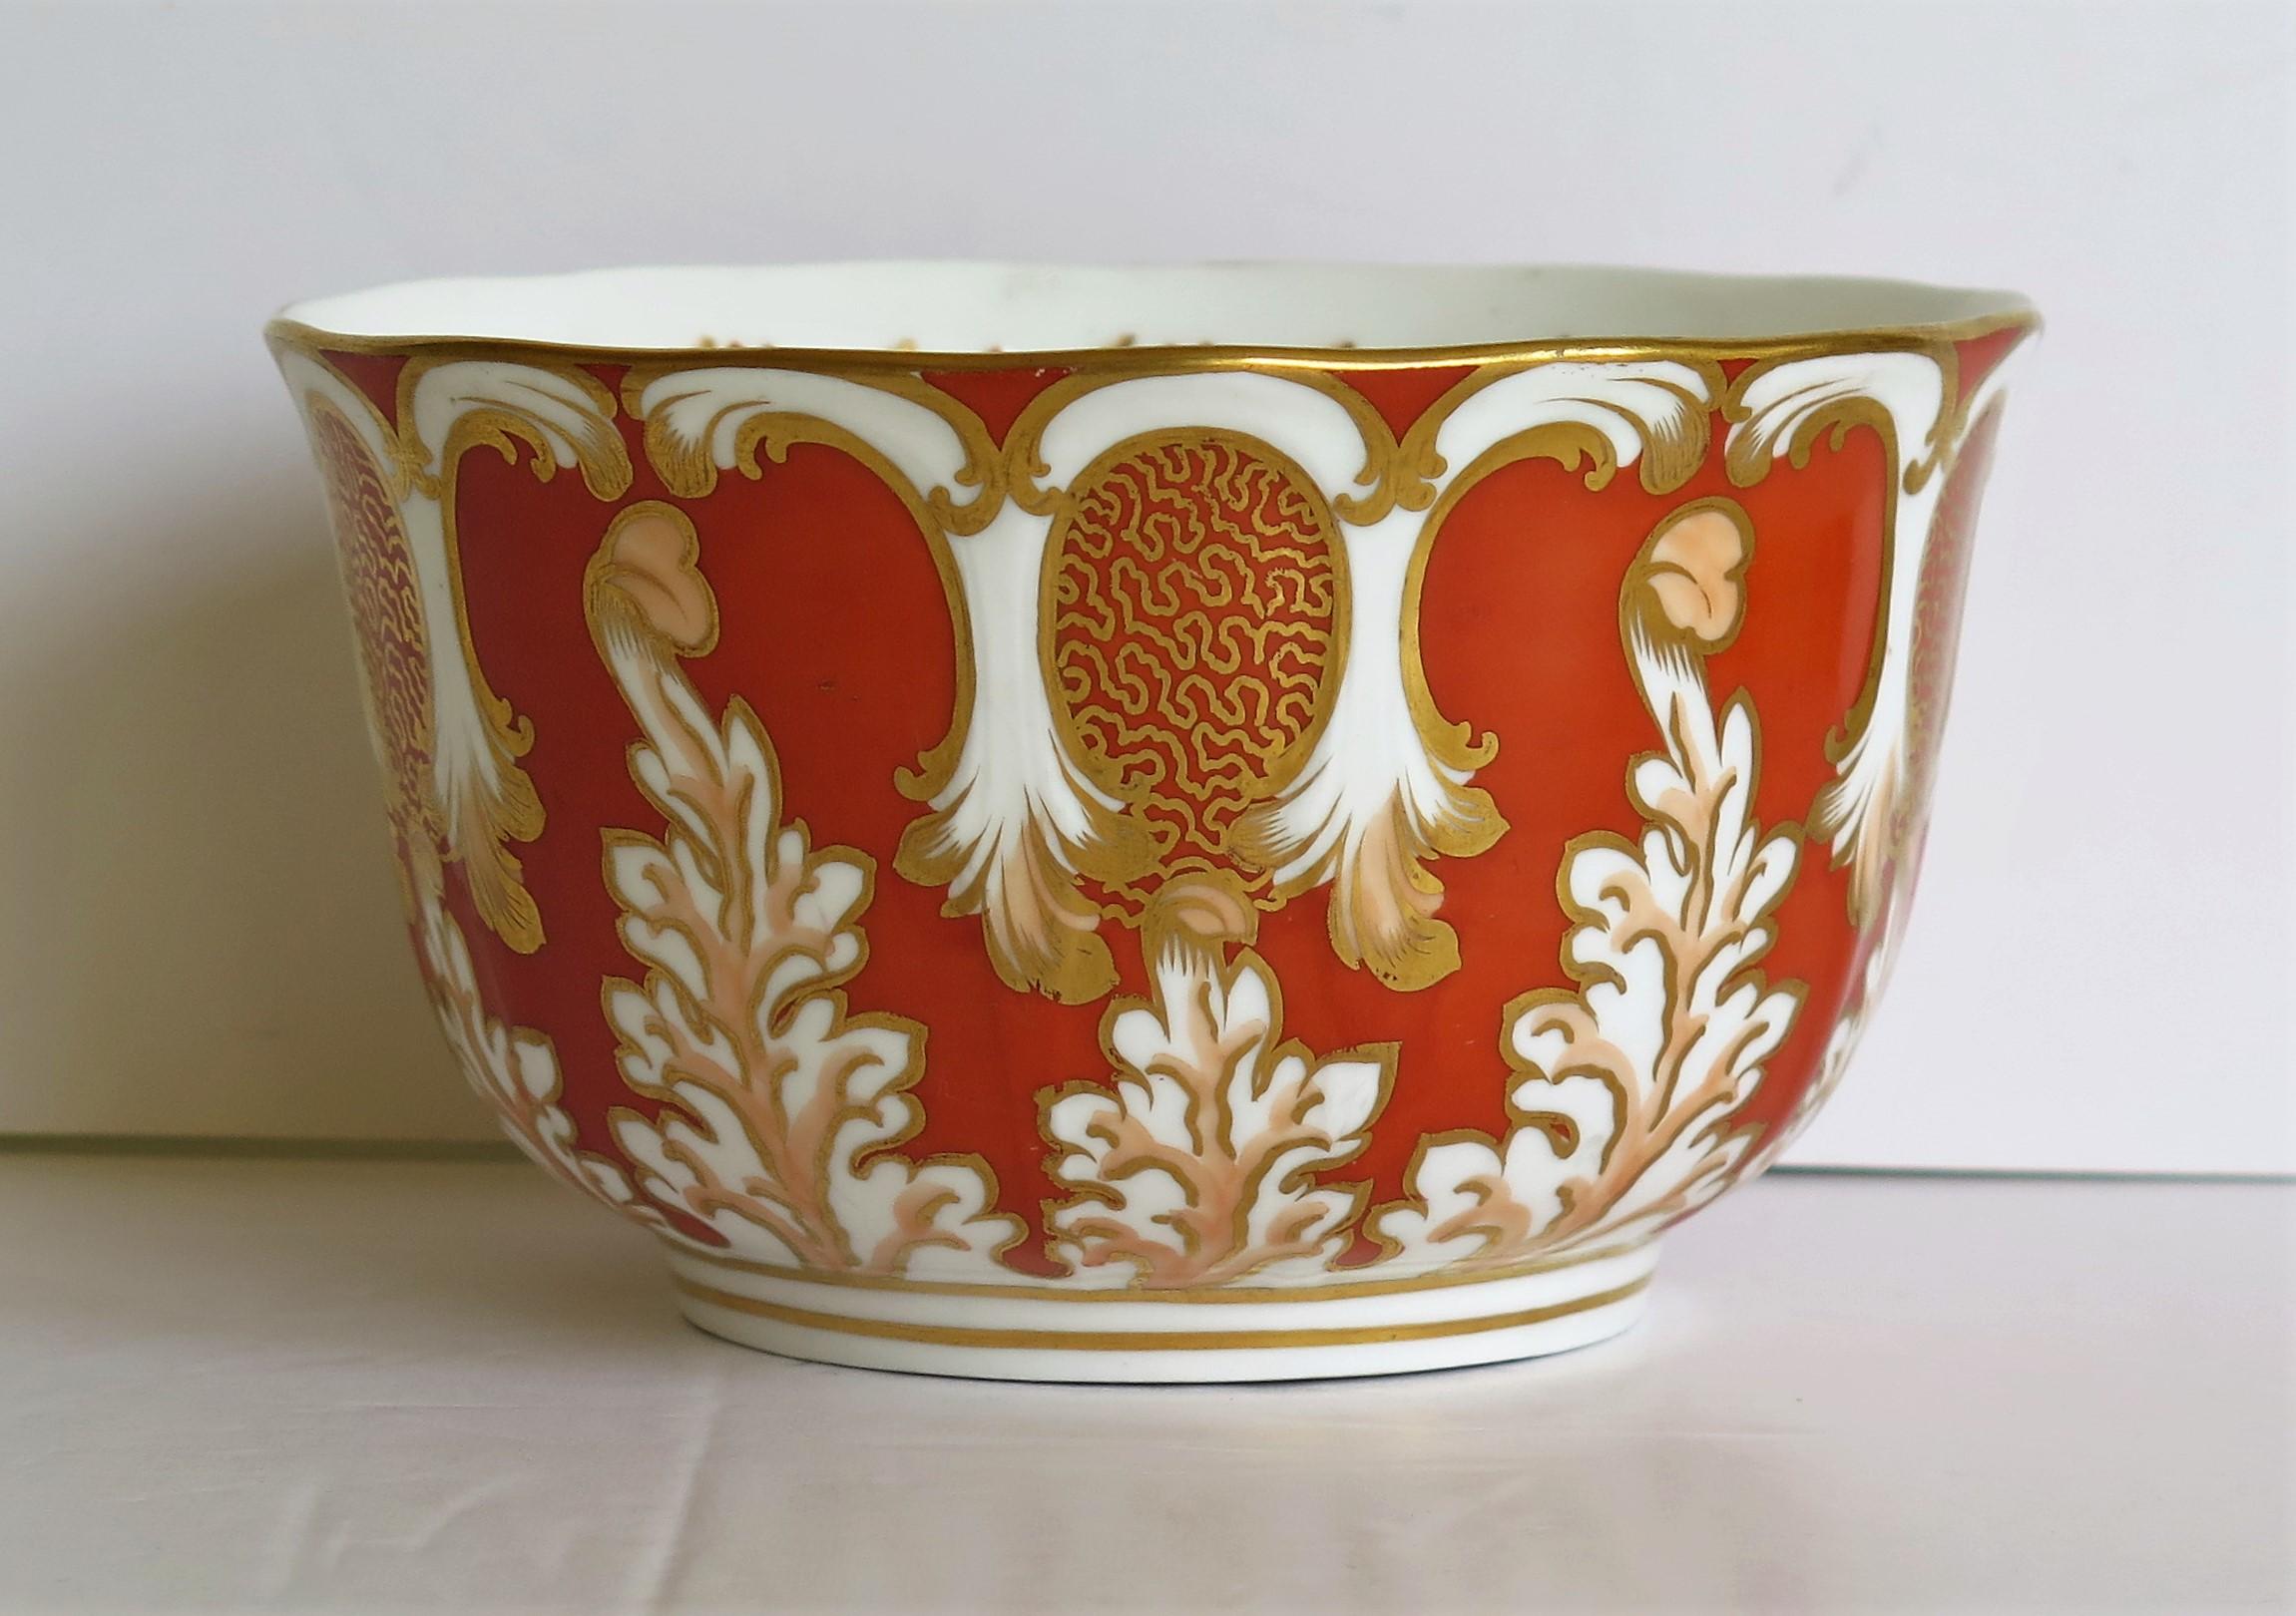 Victorian Davenport Porcelain Bowl in Pattern 2144 Fully Marked to Base, English, 1845